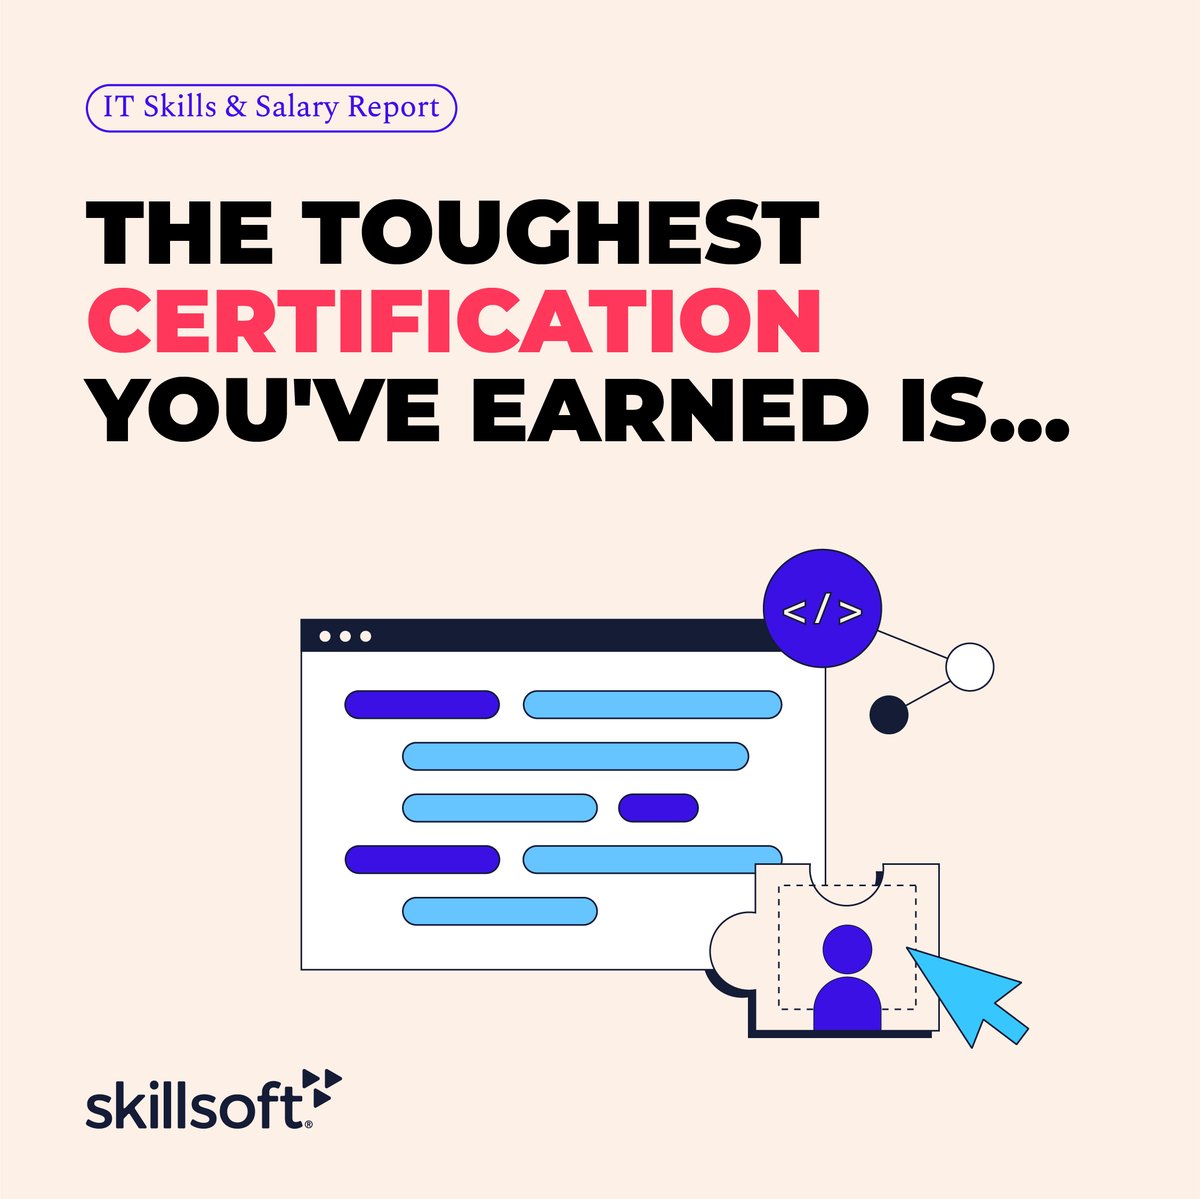 Thousands of IT professionals weigh in every year to share which certifications they've earned and how they benefit their careers. But which is the toughest (and most rewarding) to earn? Share your insights in @Skillsoft's annual survey: bit.ly/3qArO4e